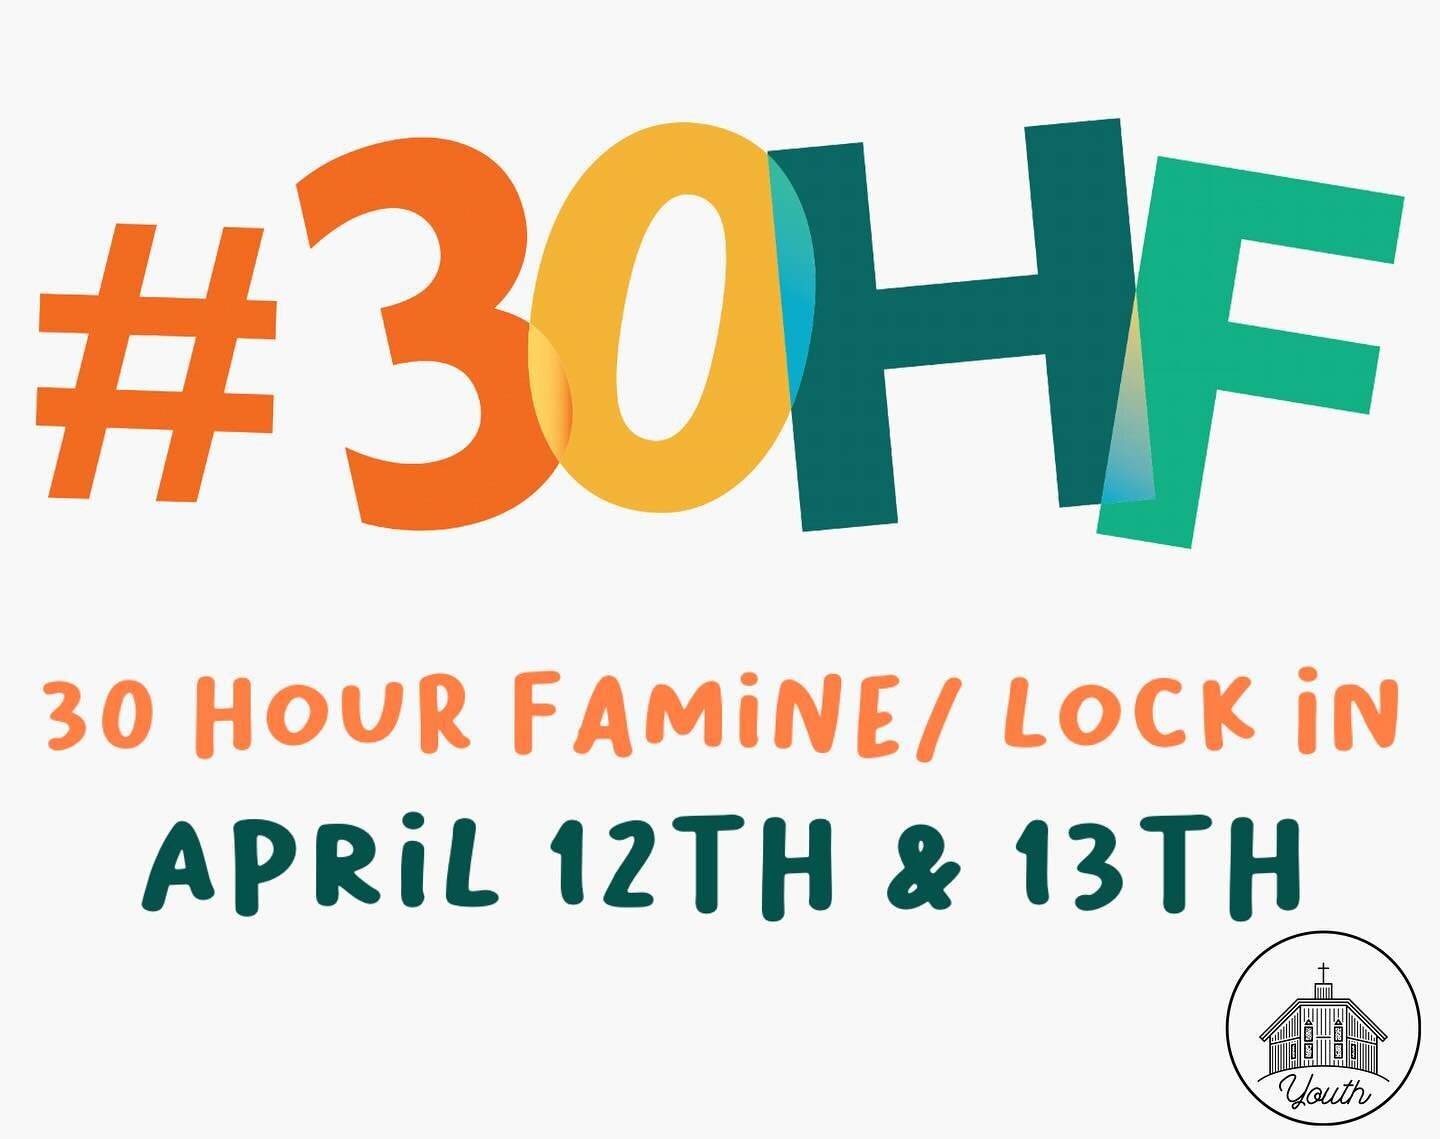 Ready to do something new that stretches you? 30 Hour Famine is what you are looking for. Come take on a challenge of fasting with us April 12th and 13th. Registration link in the bio #hillcrestyouth